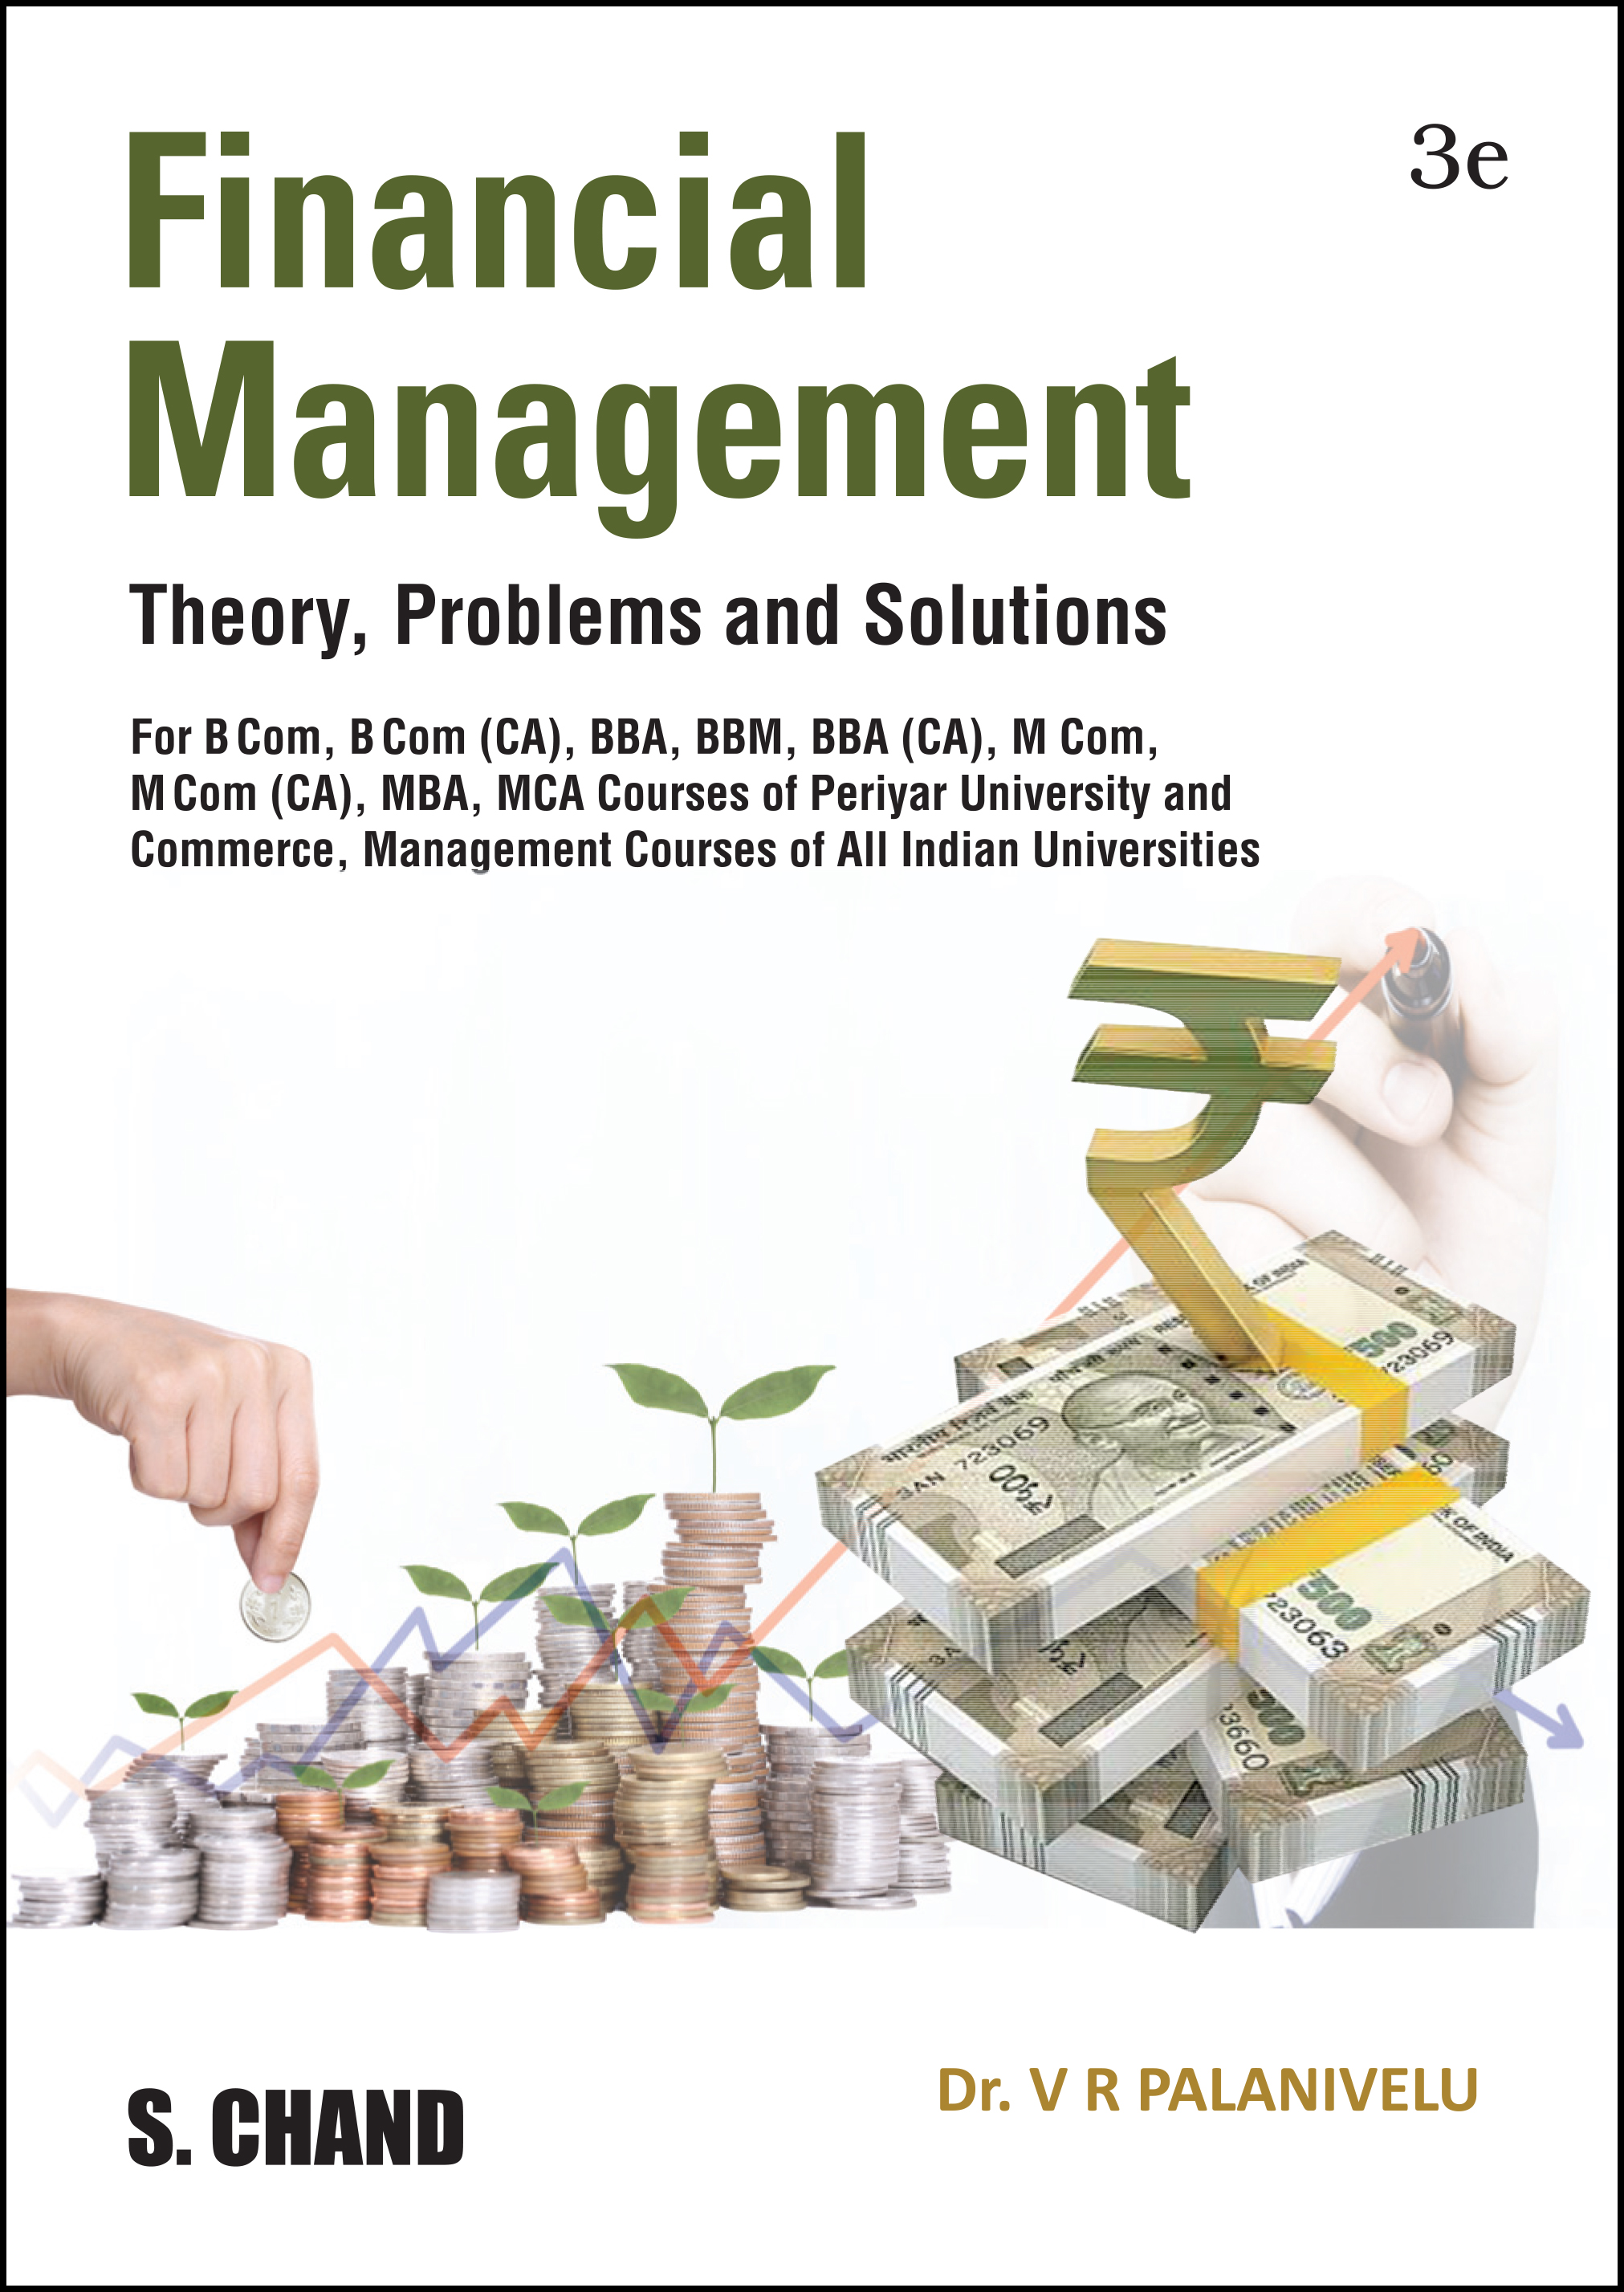 Financial Management: Theory, Problems and Solutions (For Periyar University)